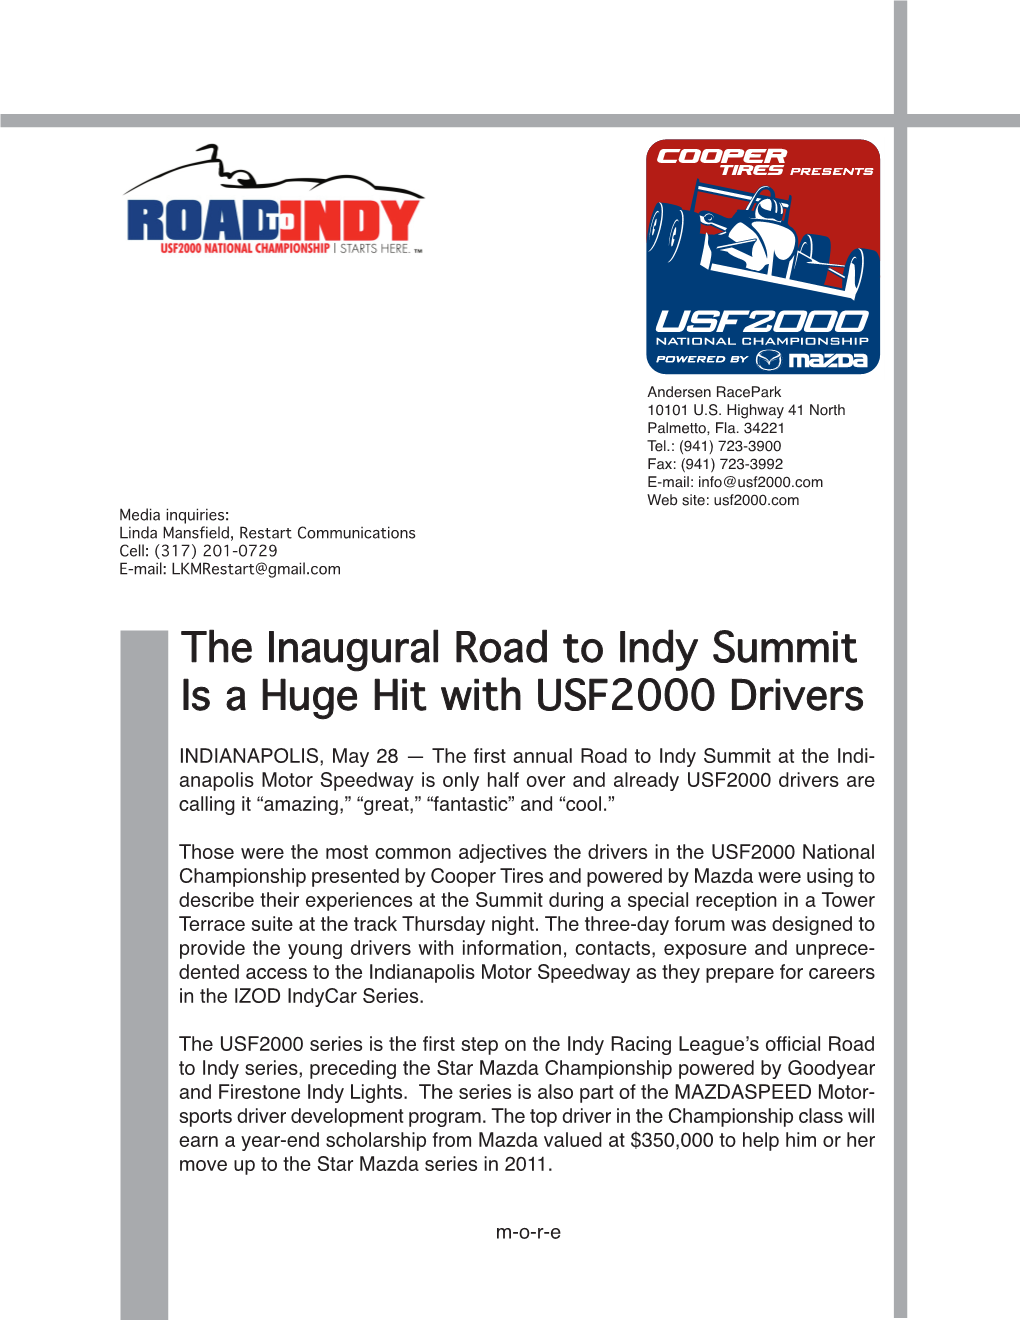 The Inaugural Road to Indy Summit Is a Huge Hit with USF2000 Drivers